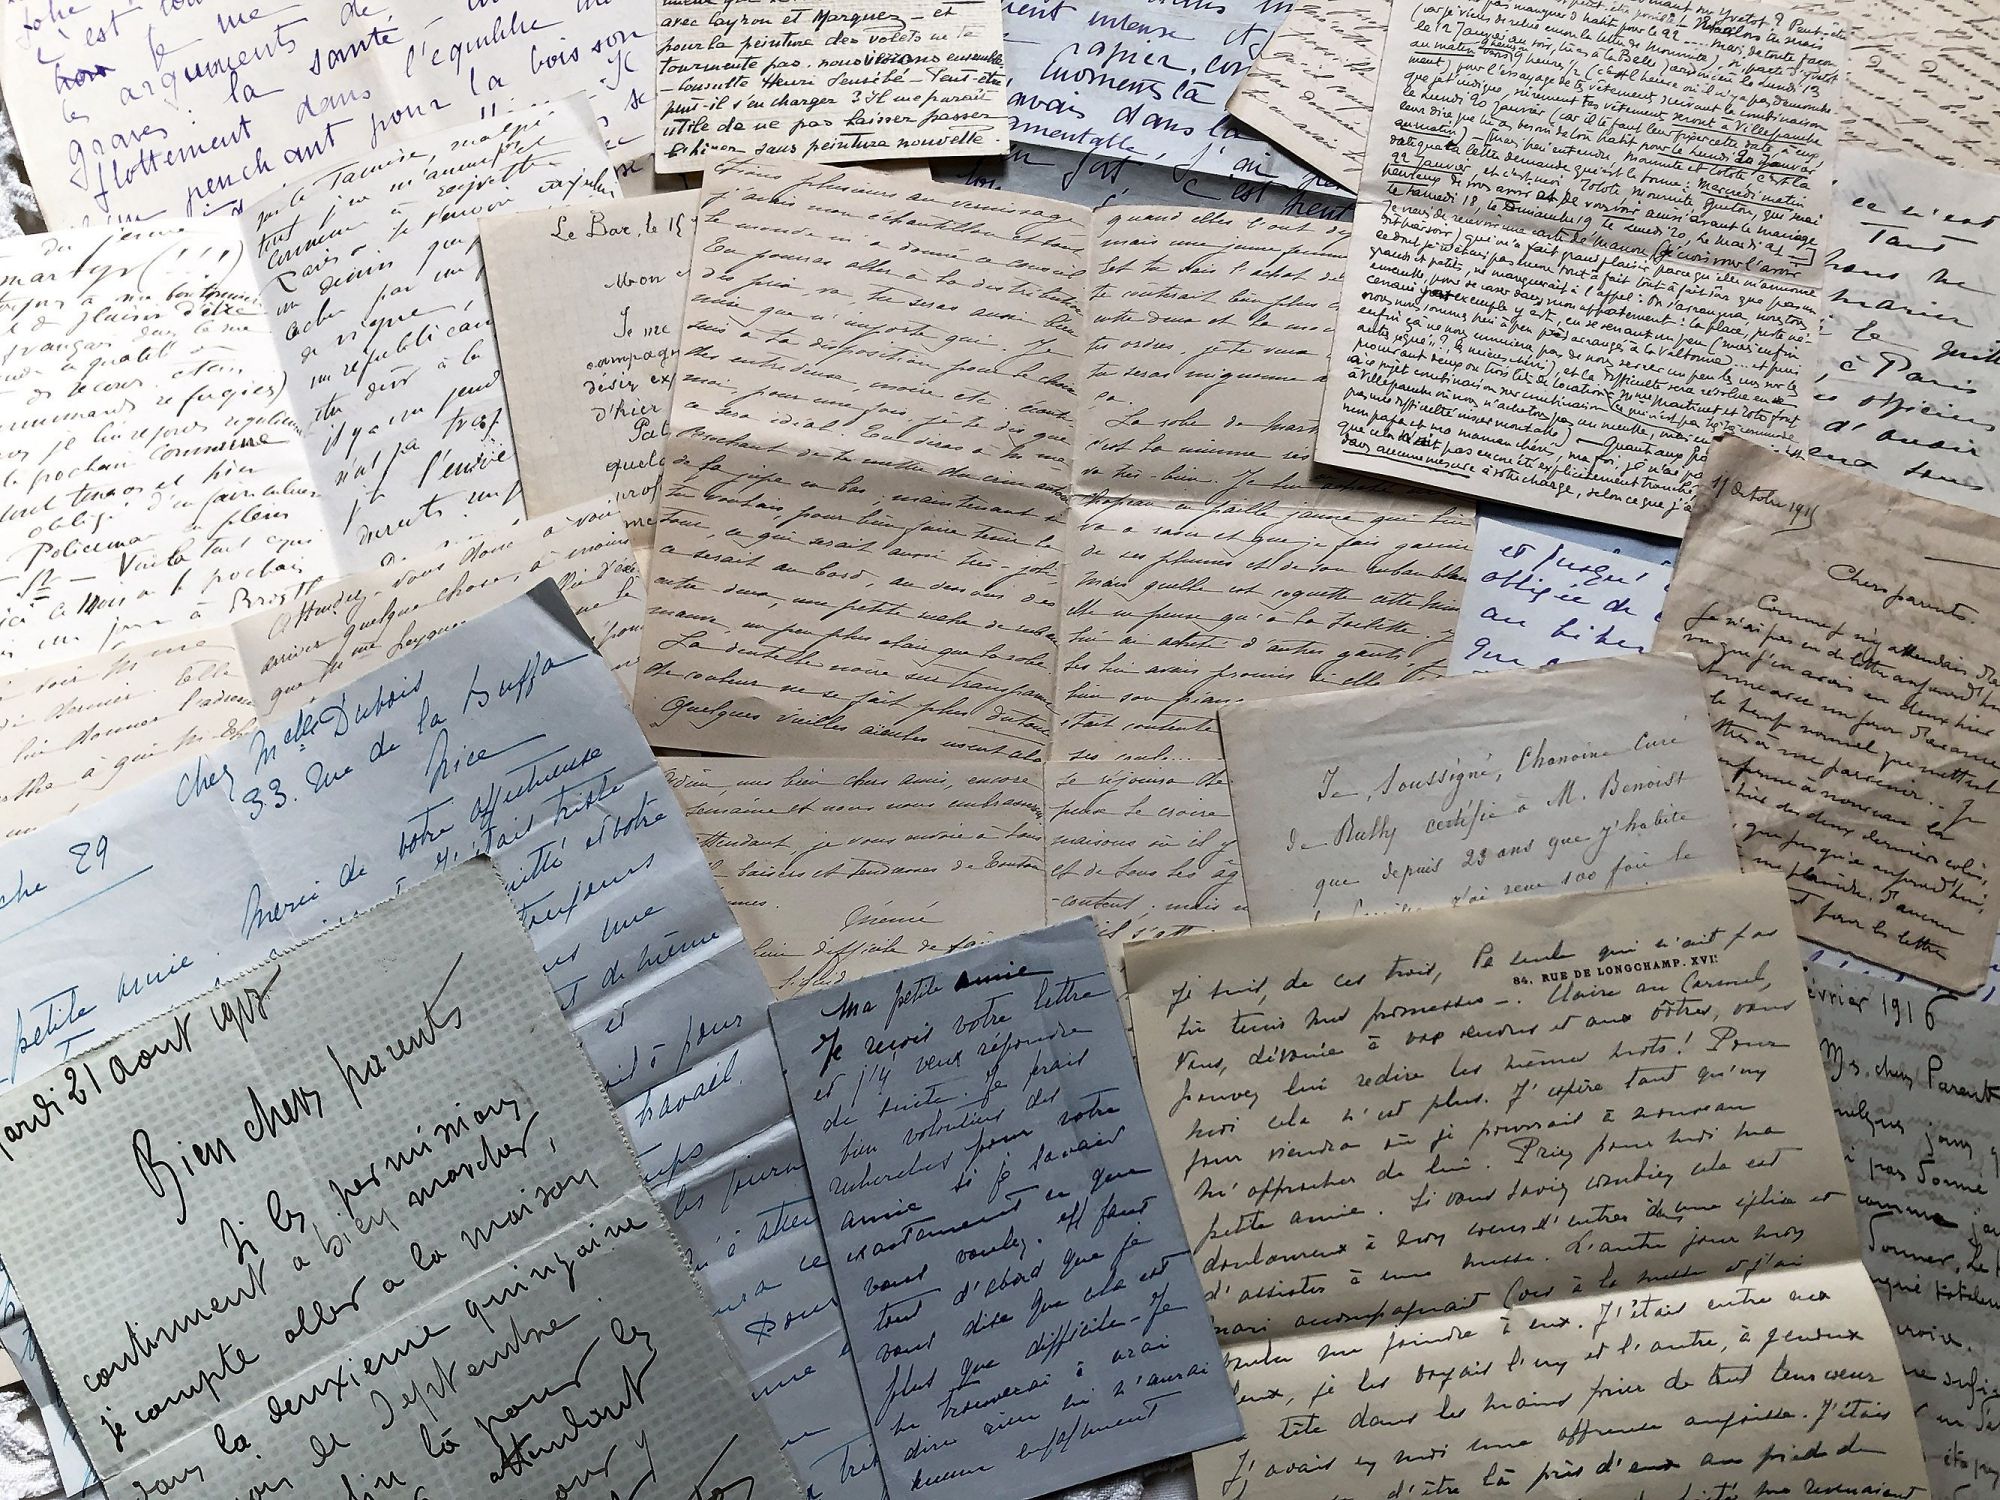 Set of 20 French vintage letters from 1910s with different handwritings, paper textures, formats